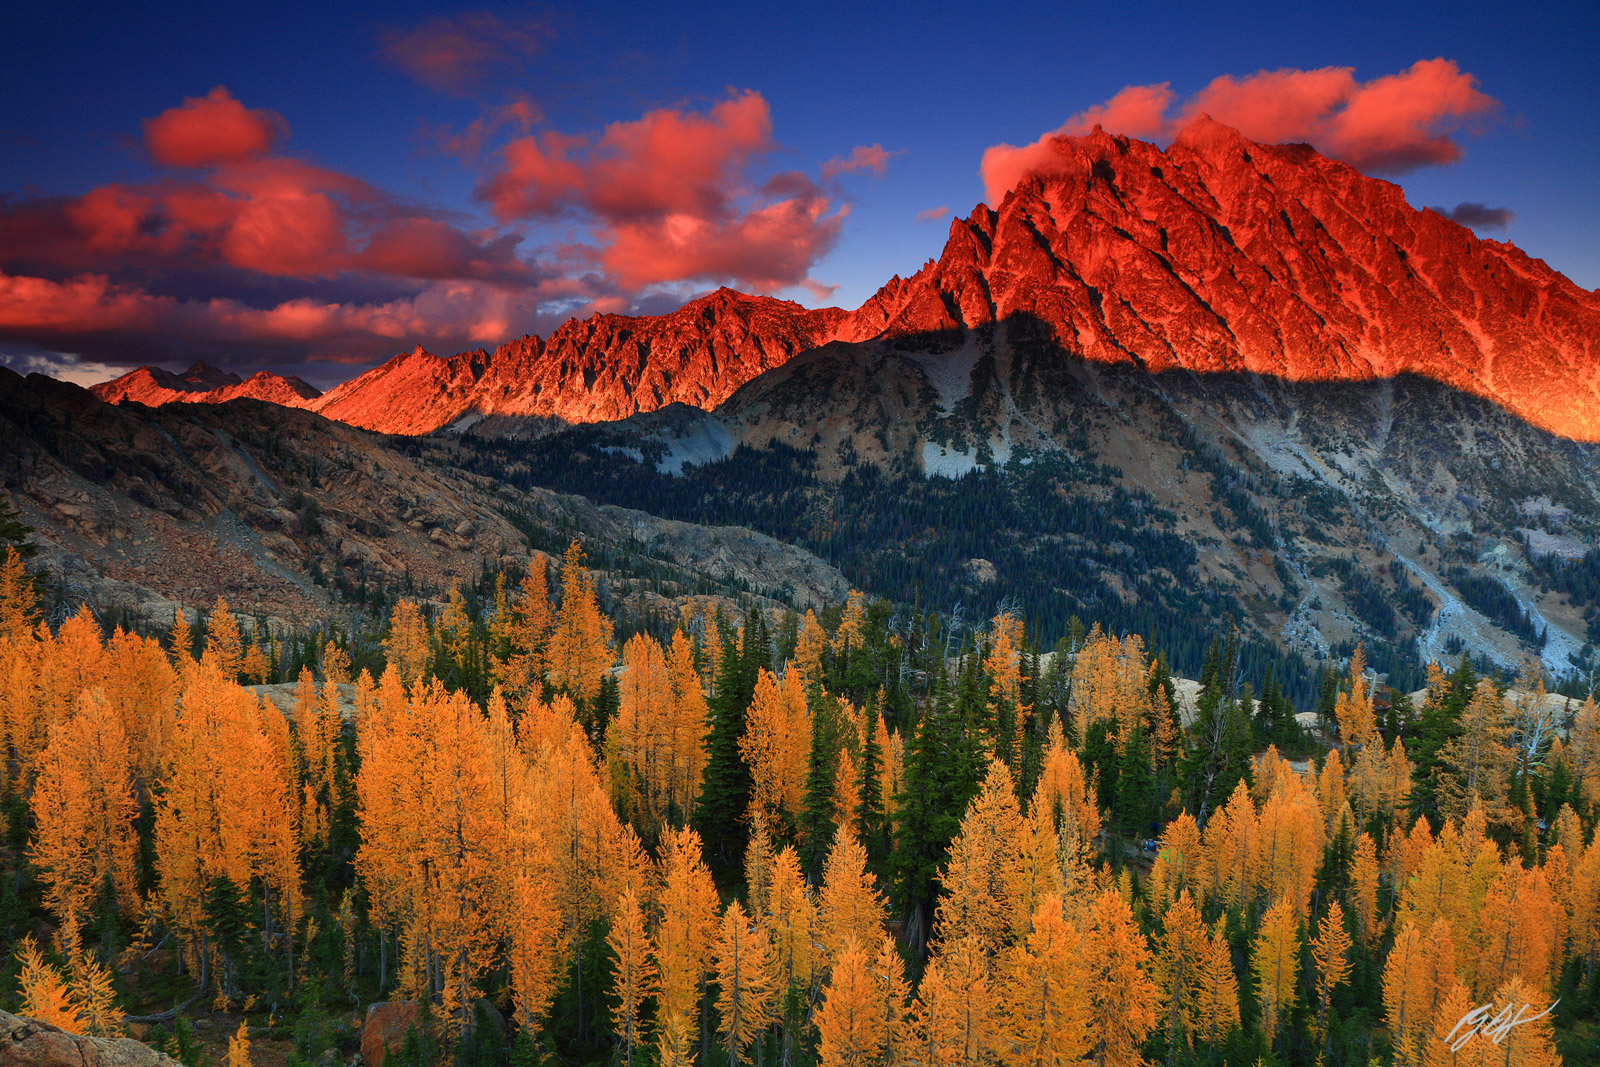 Sunset Golden Larch and Mt Stuart from the Lake Ingalls Trail in the Alpine Lakes Wilderness in Washington